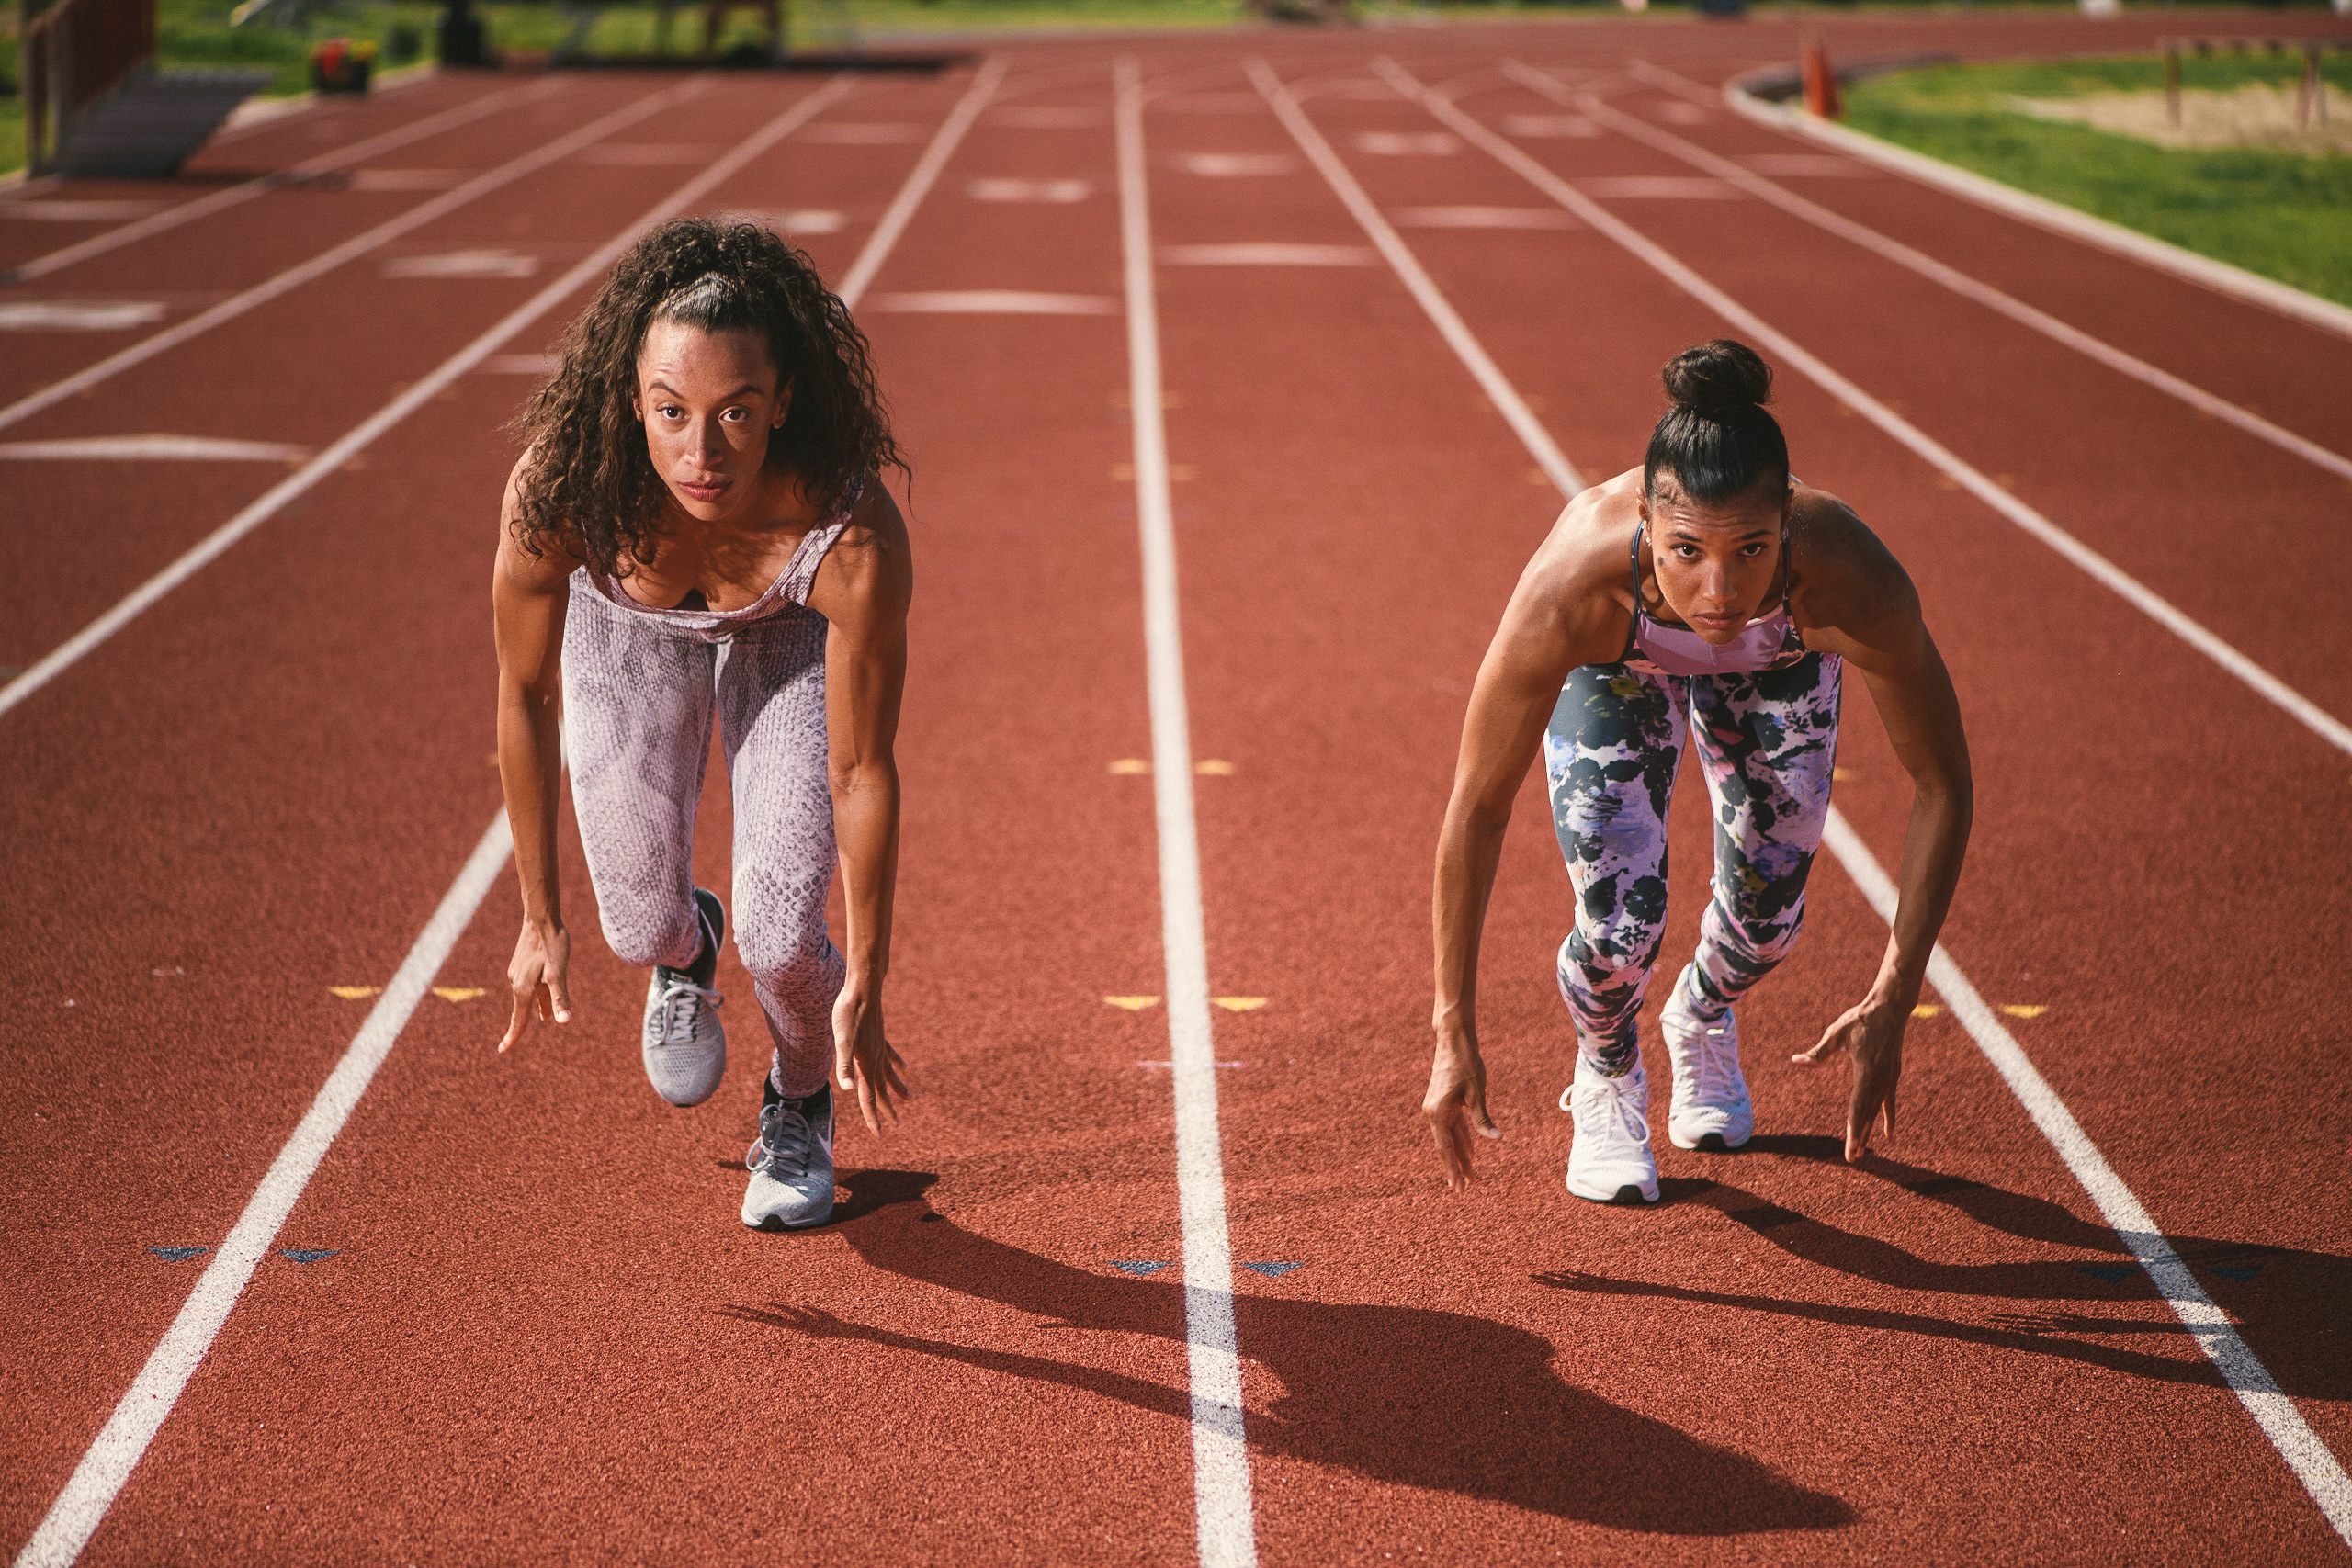 Professional Photography Services to elevate your brand C&I Studios Creative Marketing Kinetix 365 Two women posing for camera on a track field in track outfits poised to run